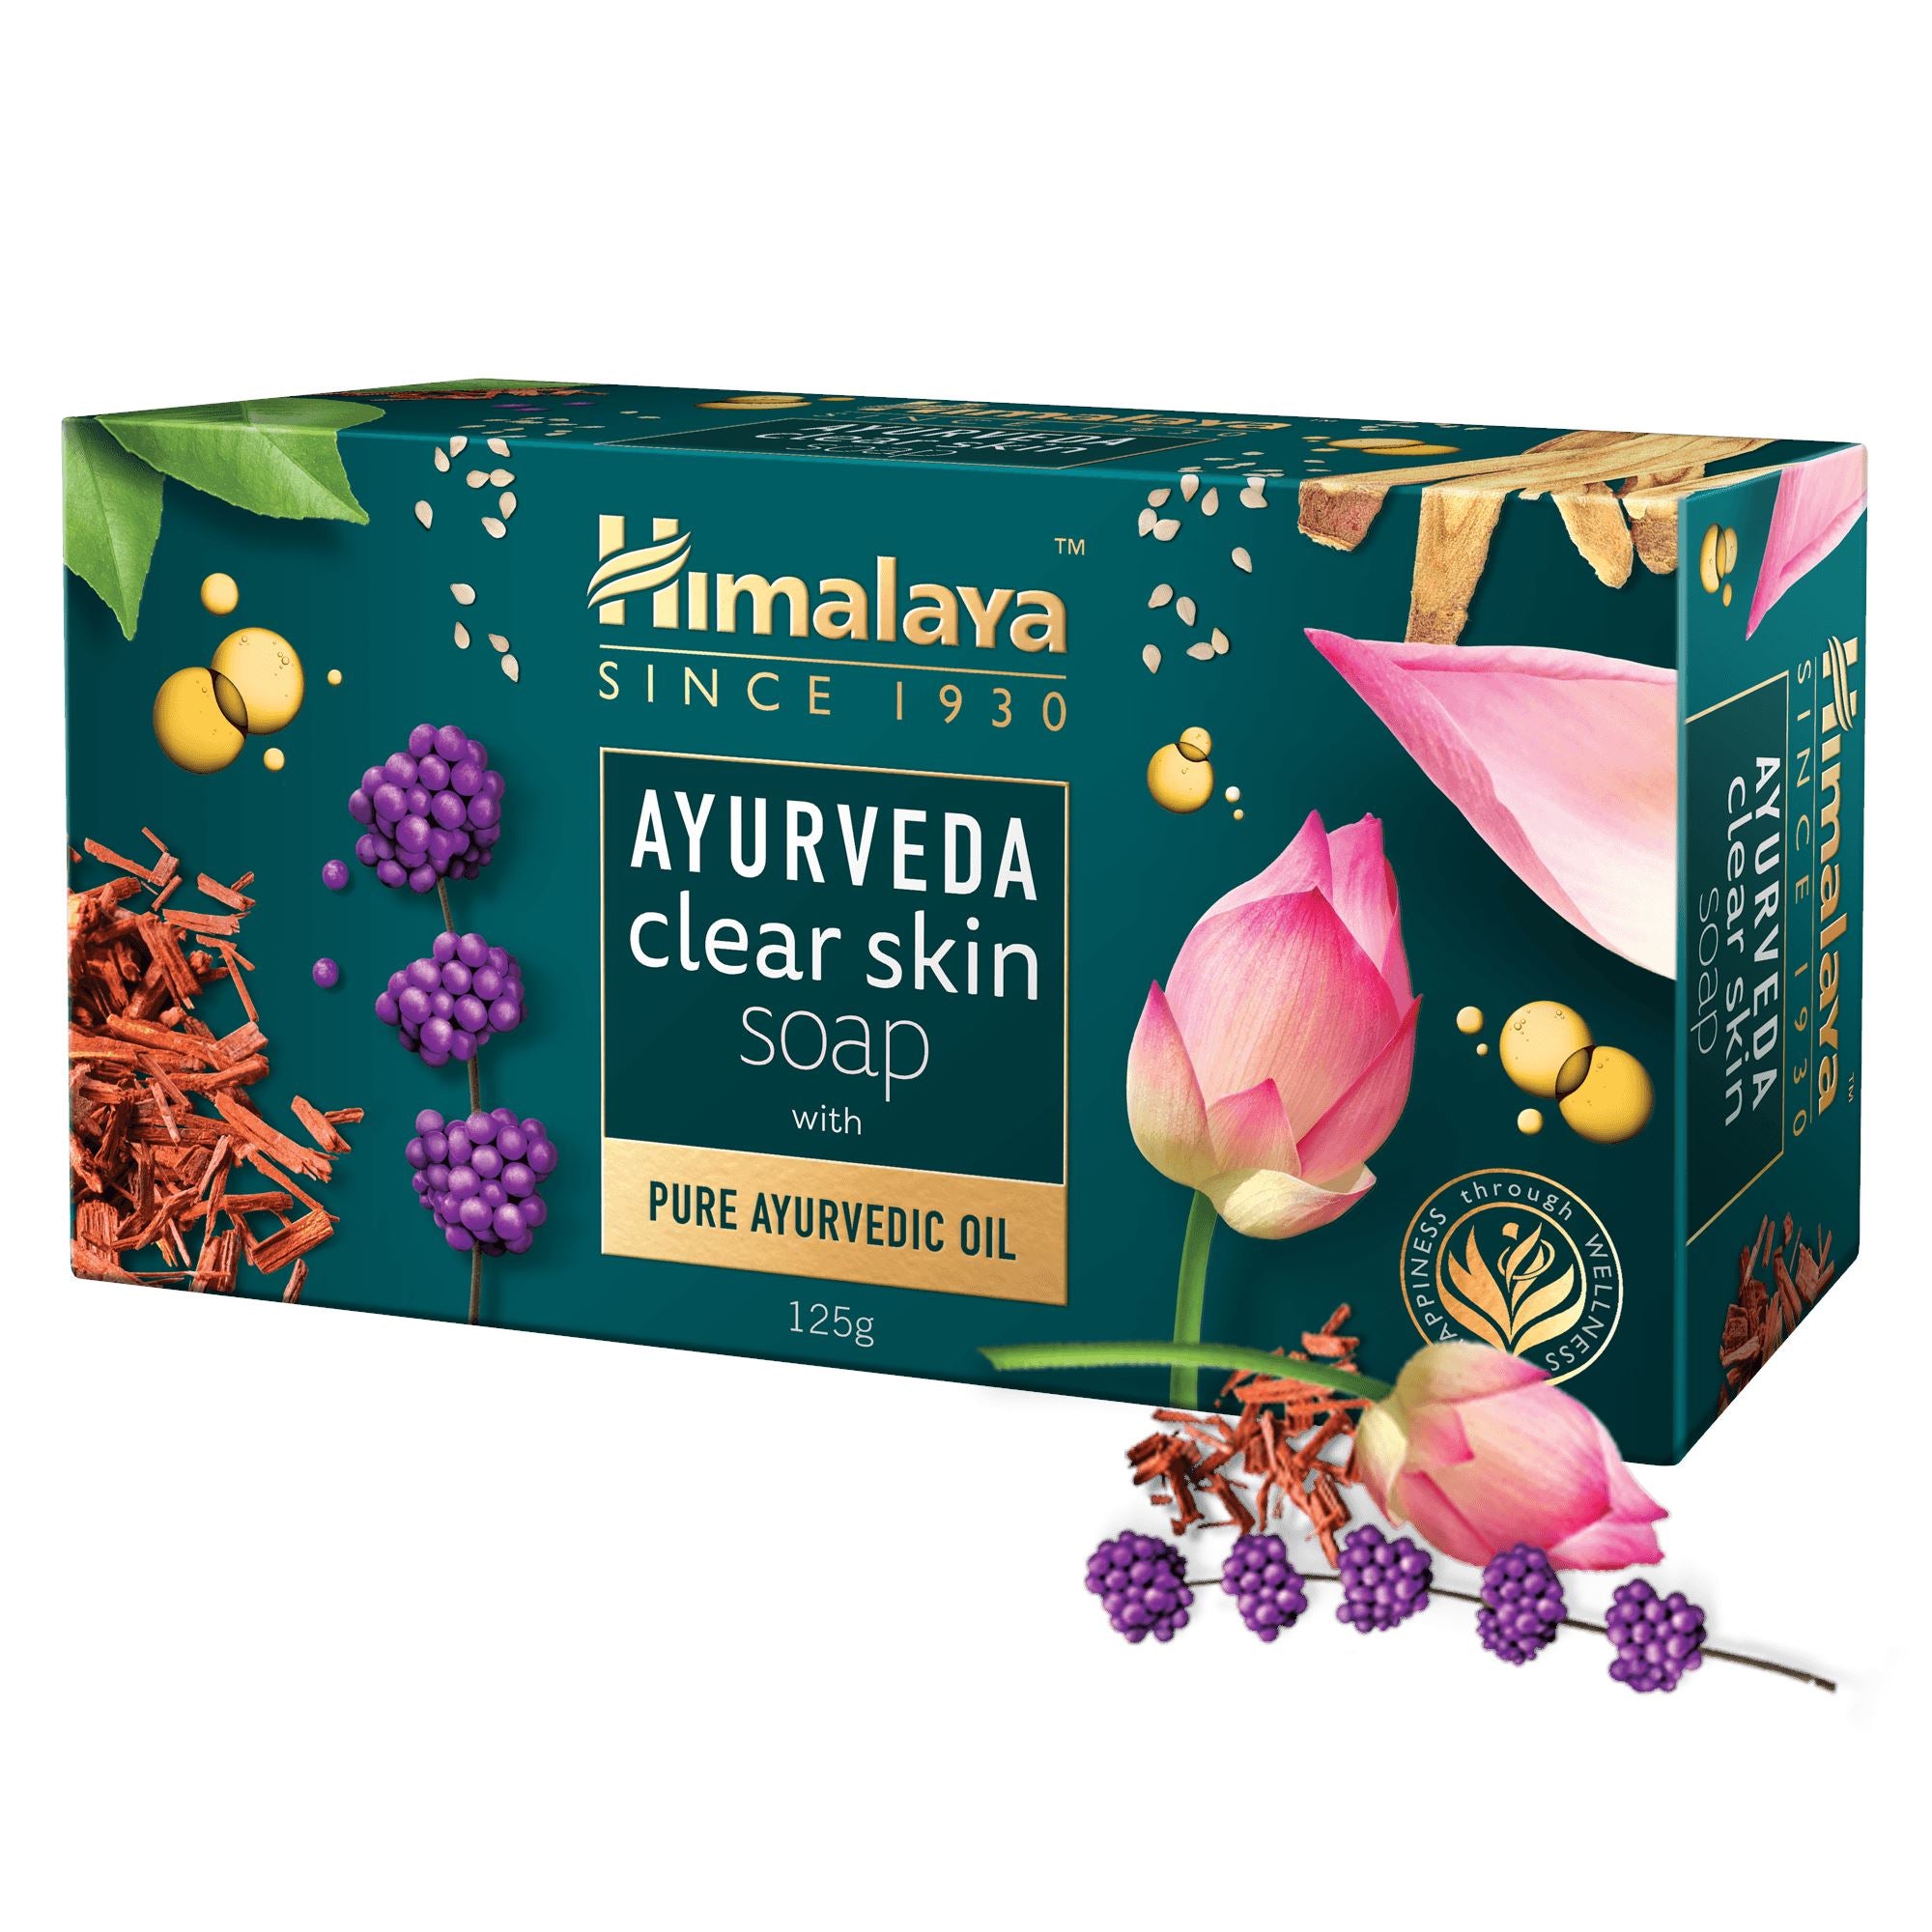 Himalaya AYURVEDA clear skin soap 125g - Product with Herbs